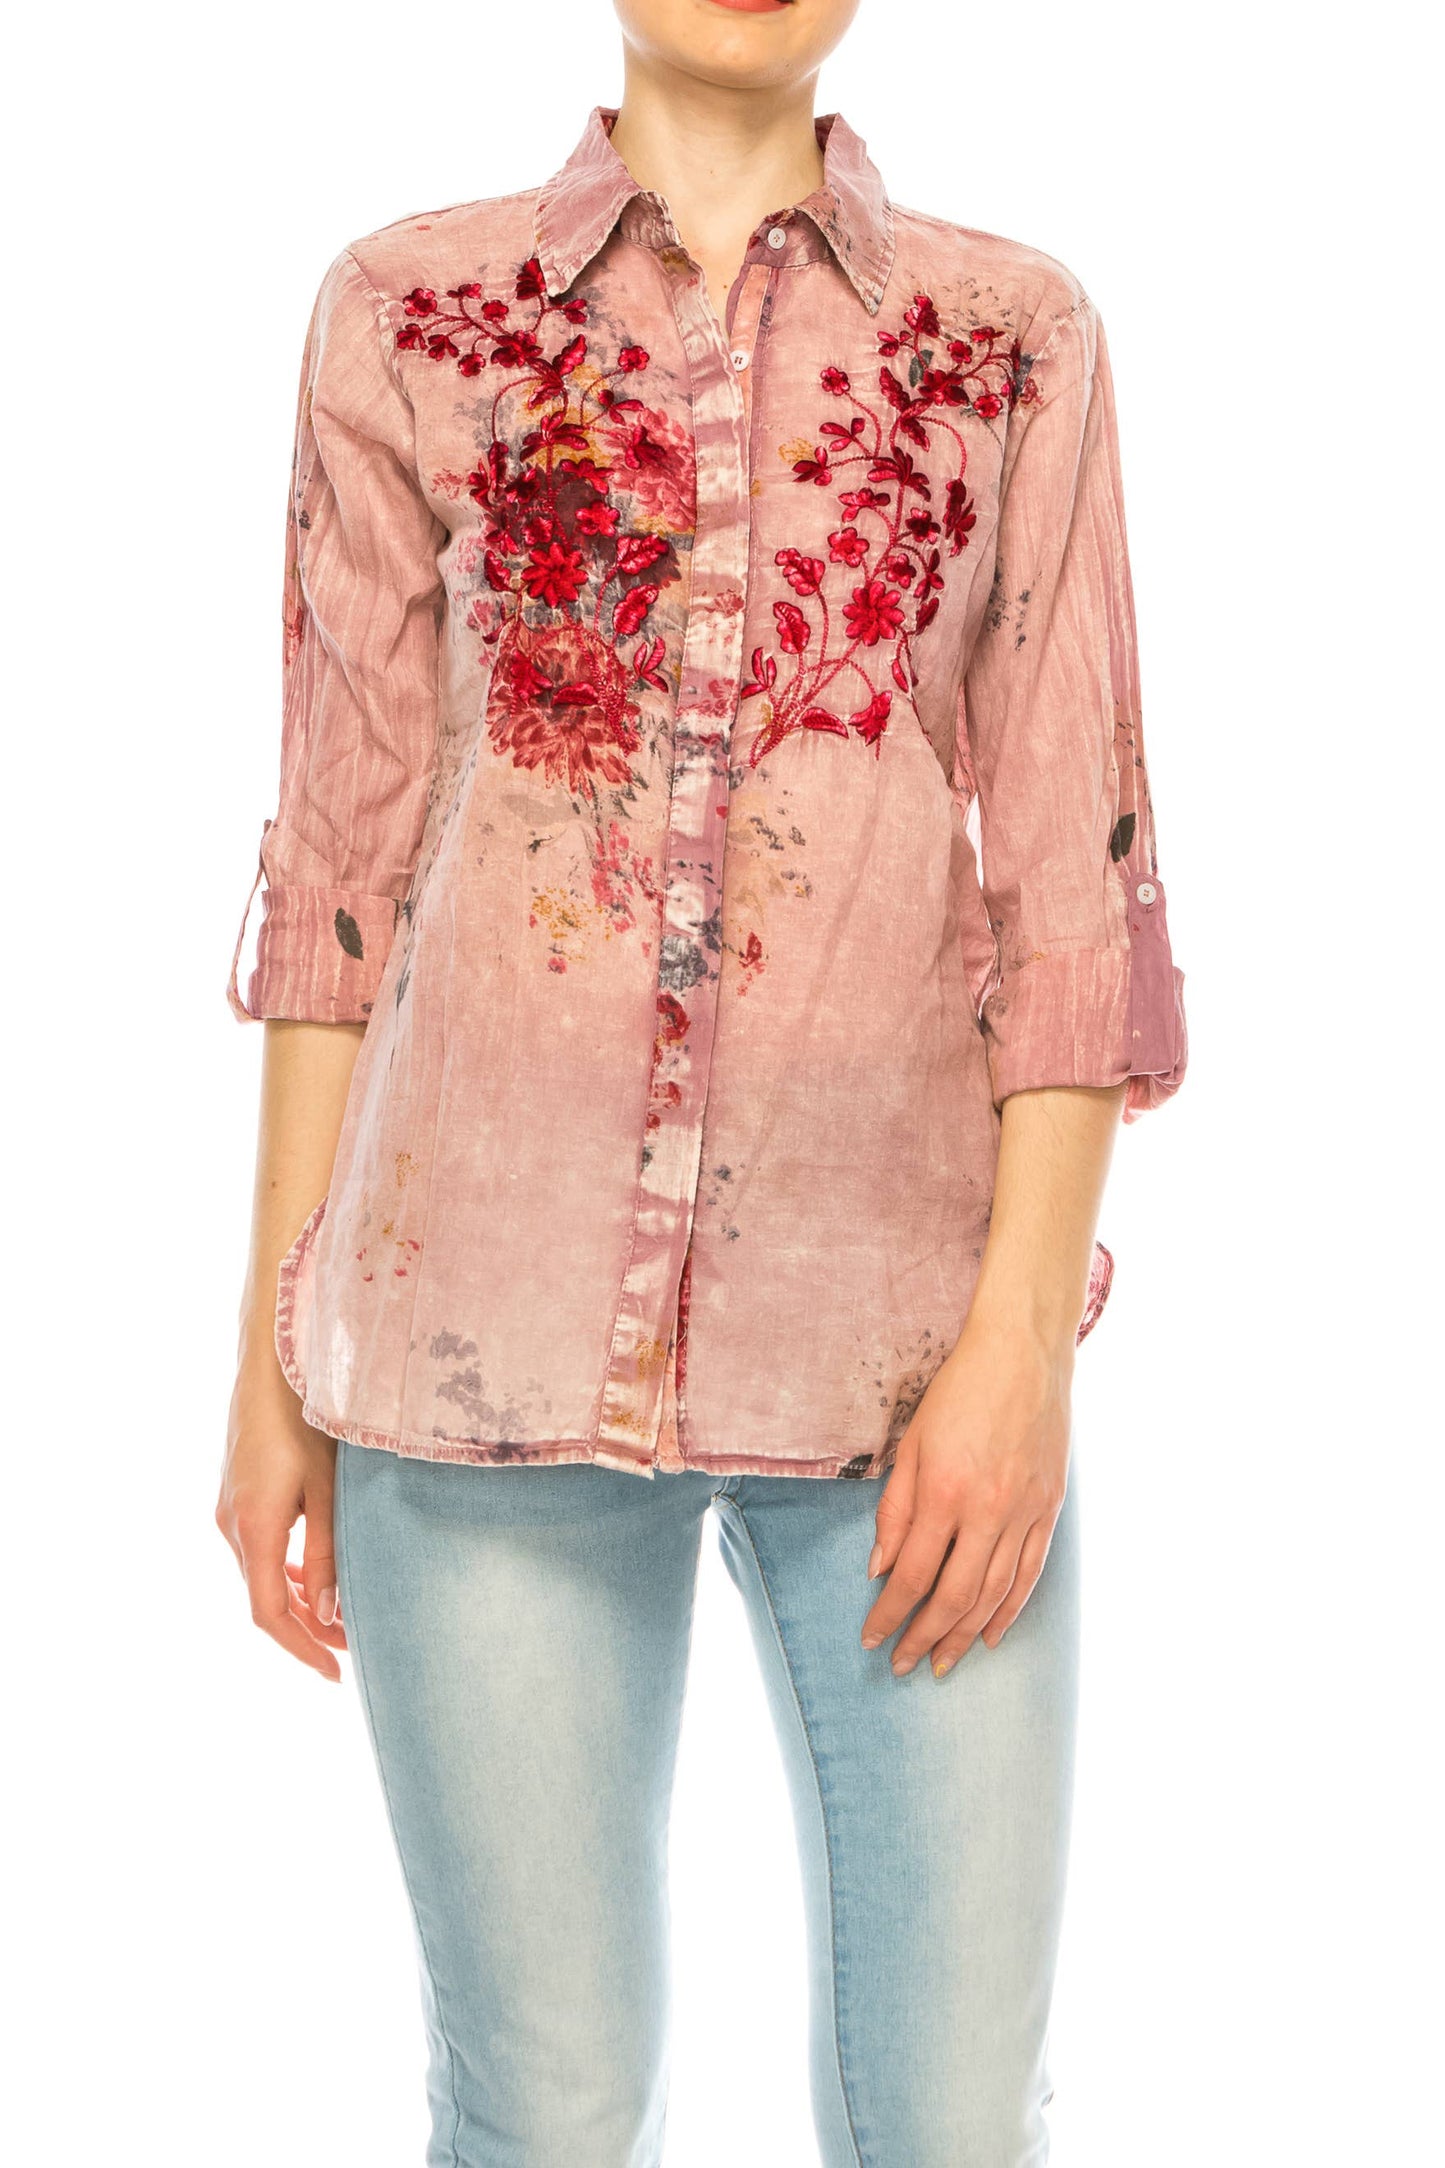 Magazine Clothing - Vintage Pink Floral Printed Shirt with Embroidery: Medium